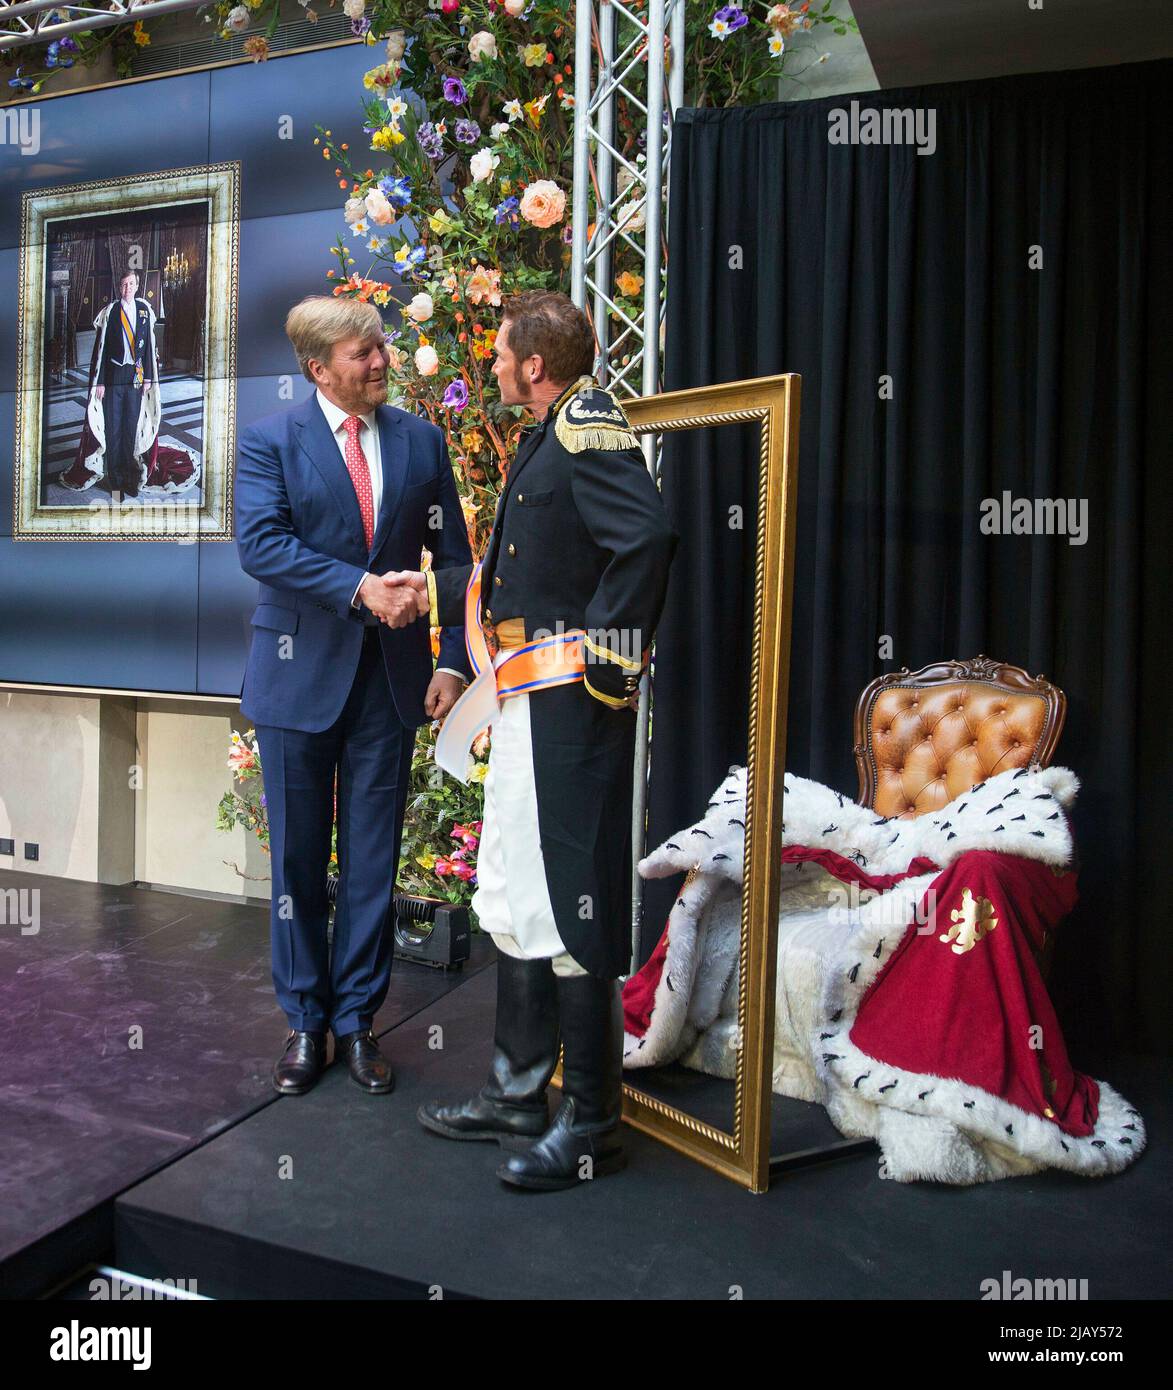 King Willem-Alexander of The Netherlands at the Mauritshuis in The Hague, on June 01, 2022, to open the exhibition FLASH | BACK, which will celebrate its 200th anniversary in 2022. In the exhibition, sixteen photographers, both established names and up-and-coming talent, translate the work of 17th century masters into sixteen new works of art Albert Nieboer/Netherlands OUT/Point de Vue OUT Stock Photo